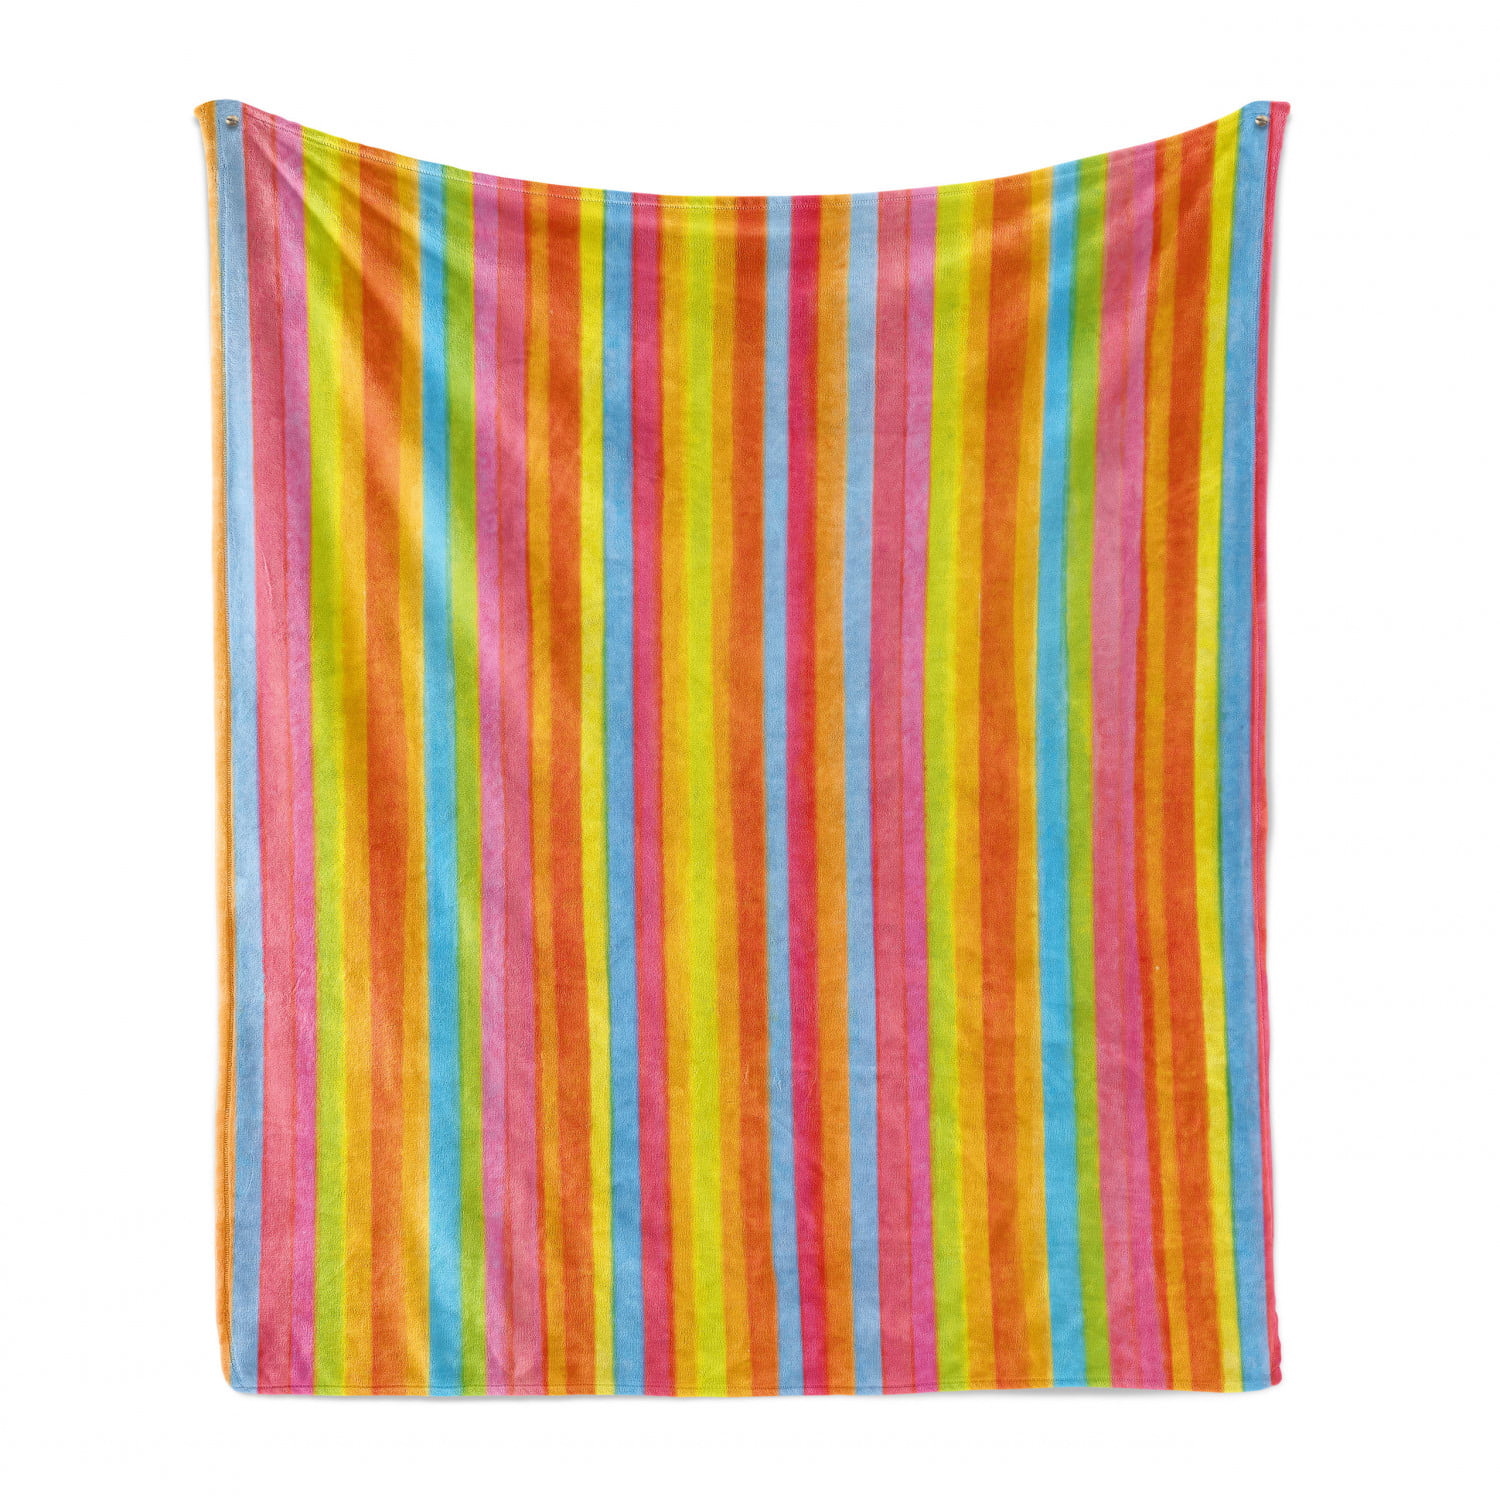 Striped Soft Flannel Fleece Throw Blanket, Vertical Stripes in Lively ...